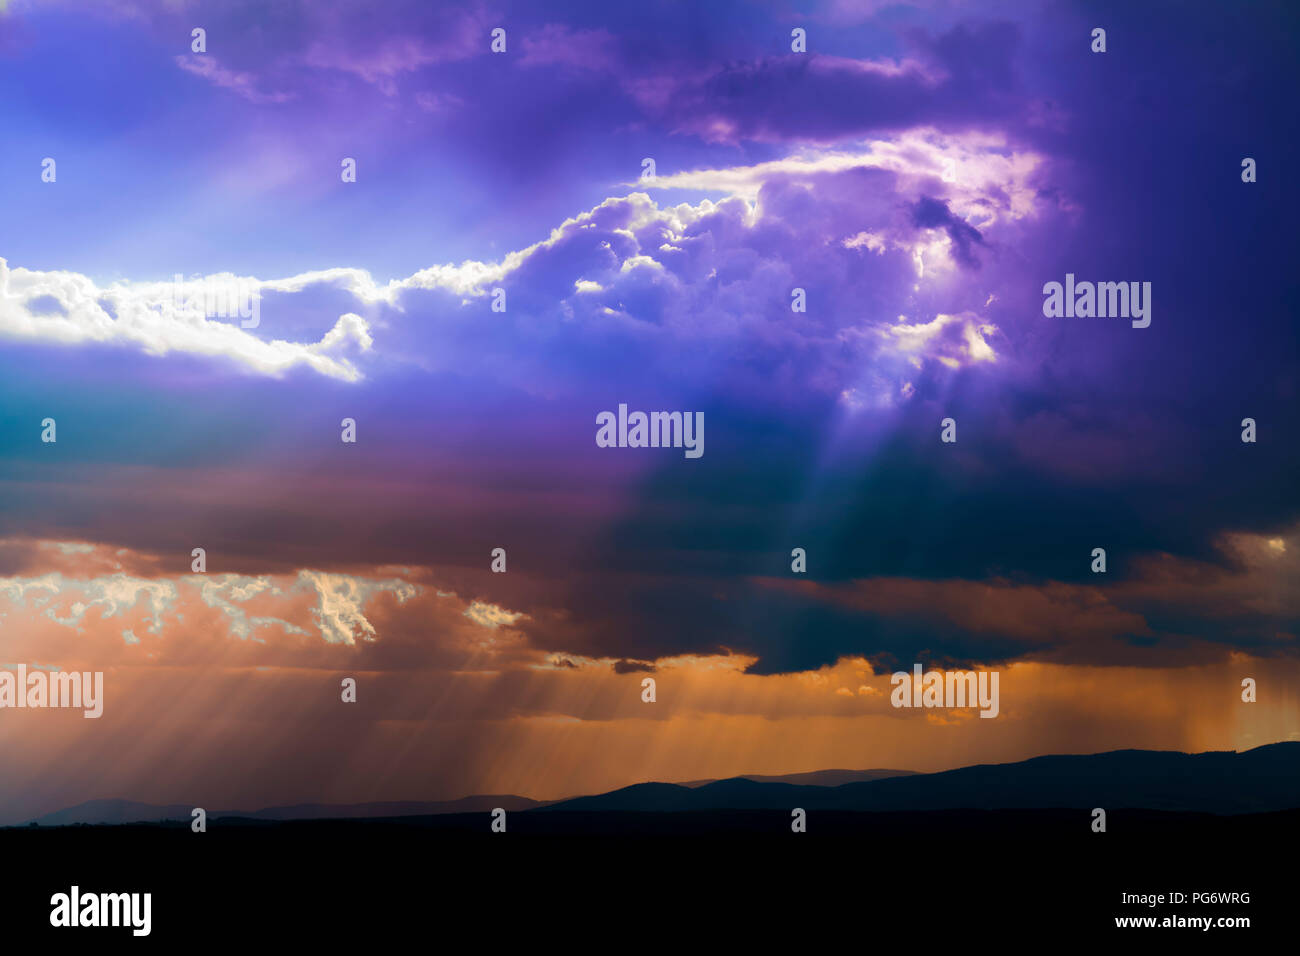 Germany, dark and dramatic cloudy mood during thunderstorm Stock Photo